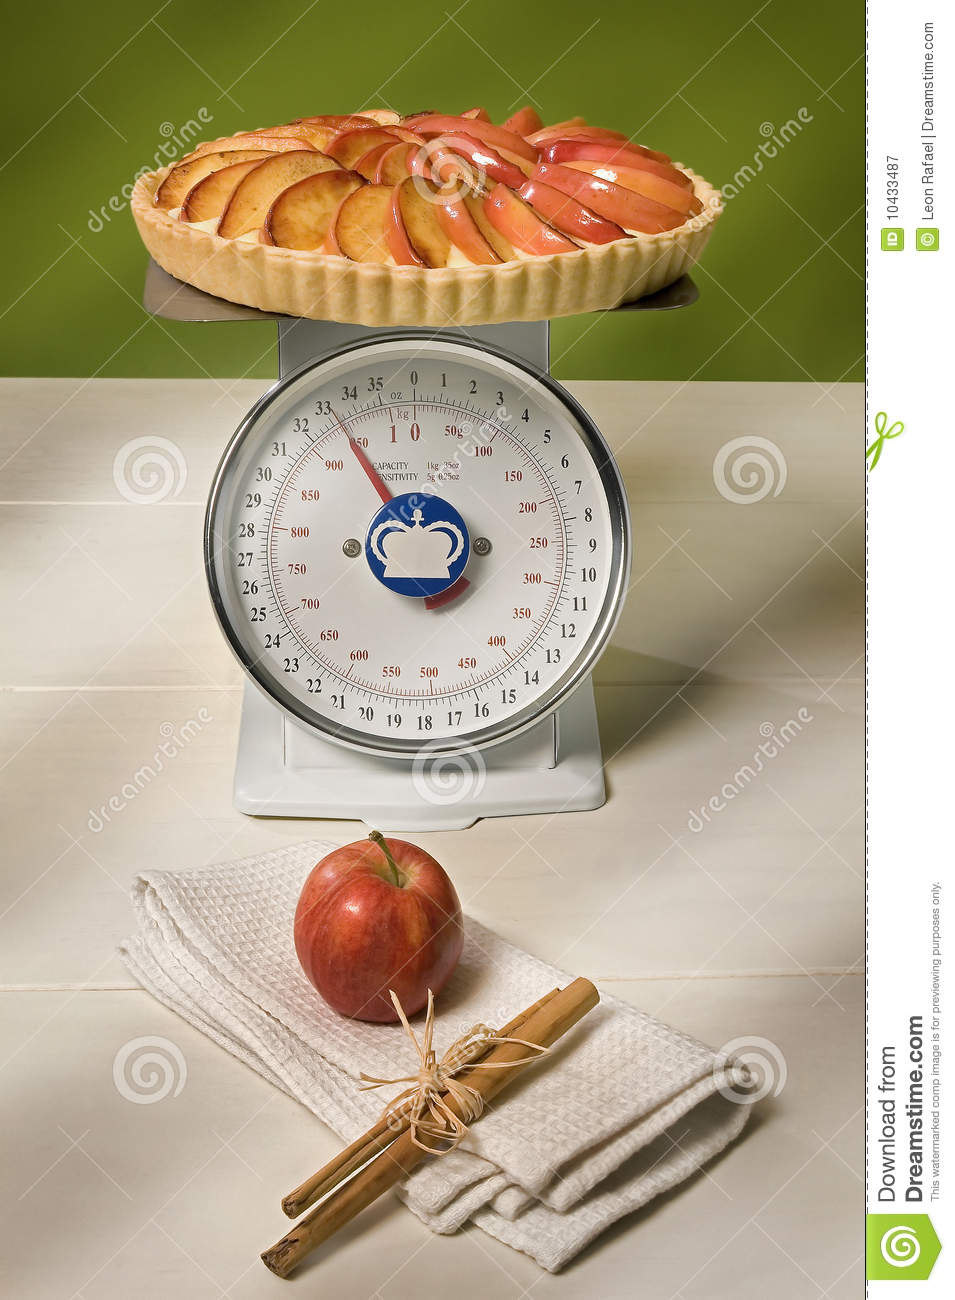 Baking Scale With Apple Tart Royalty Free Stock Photography   Image